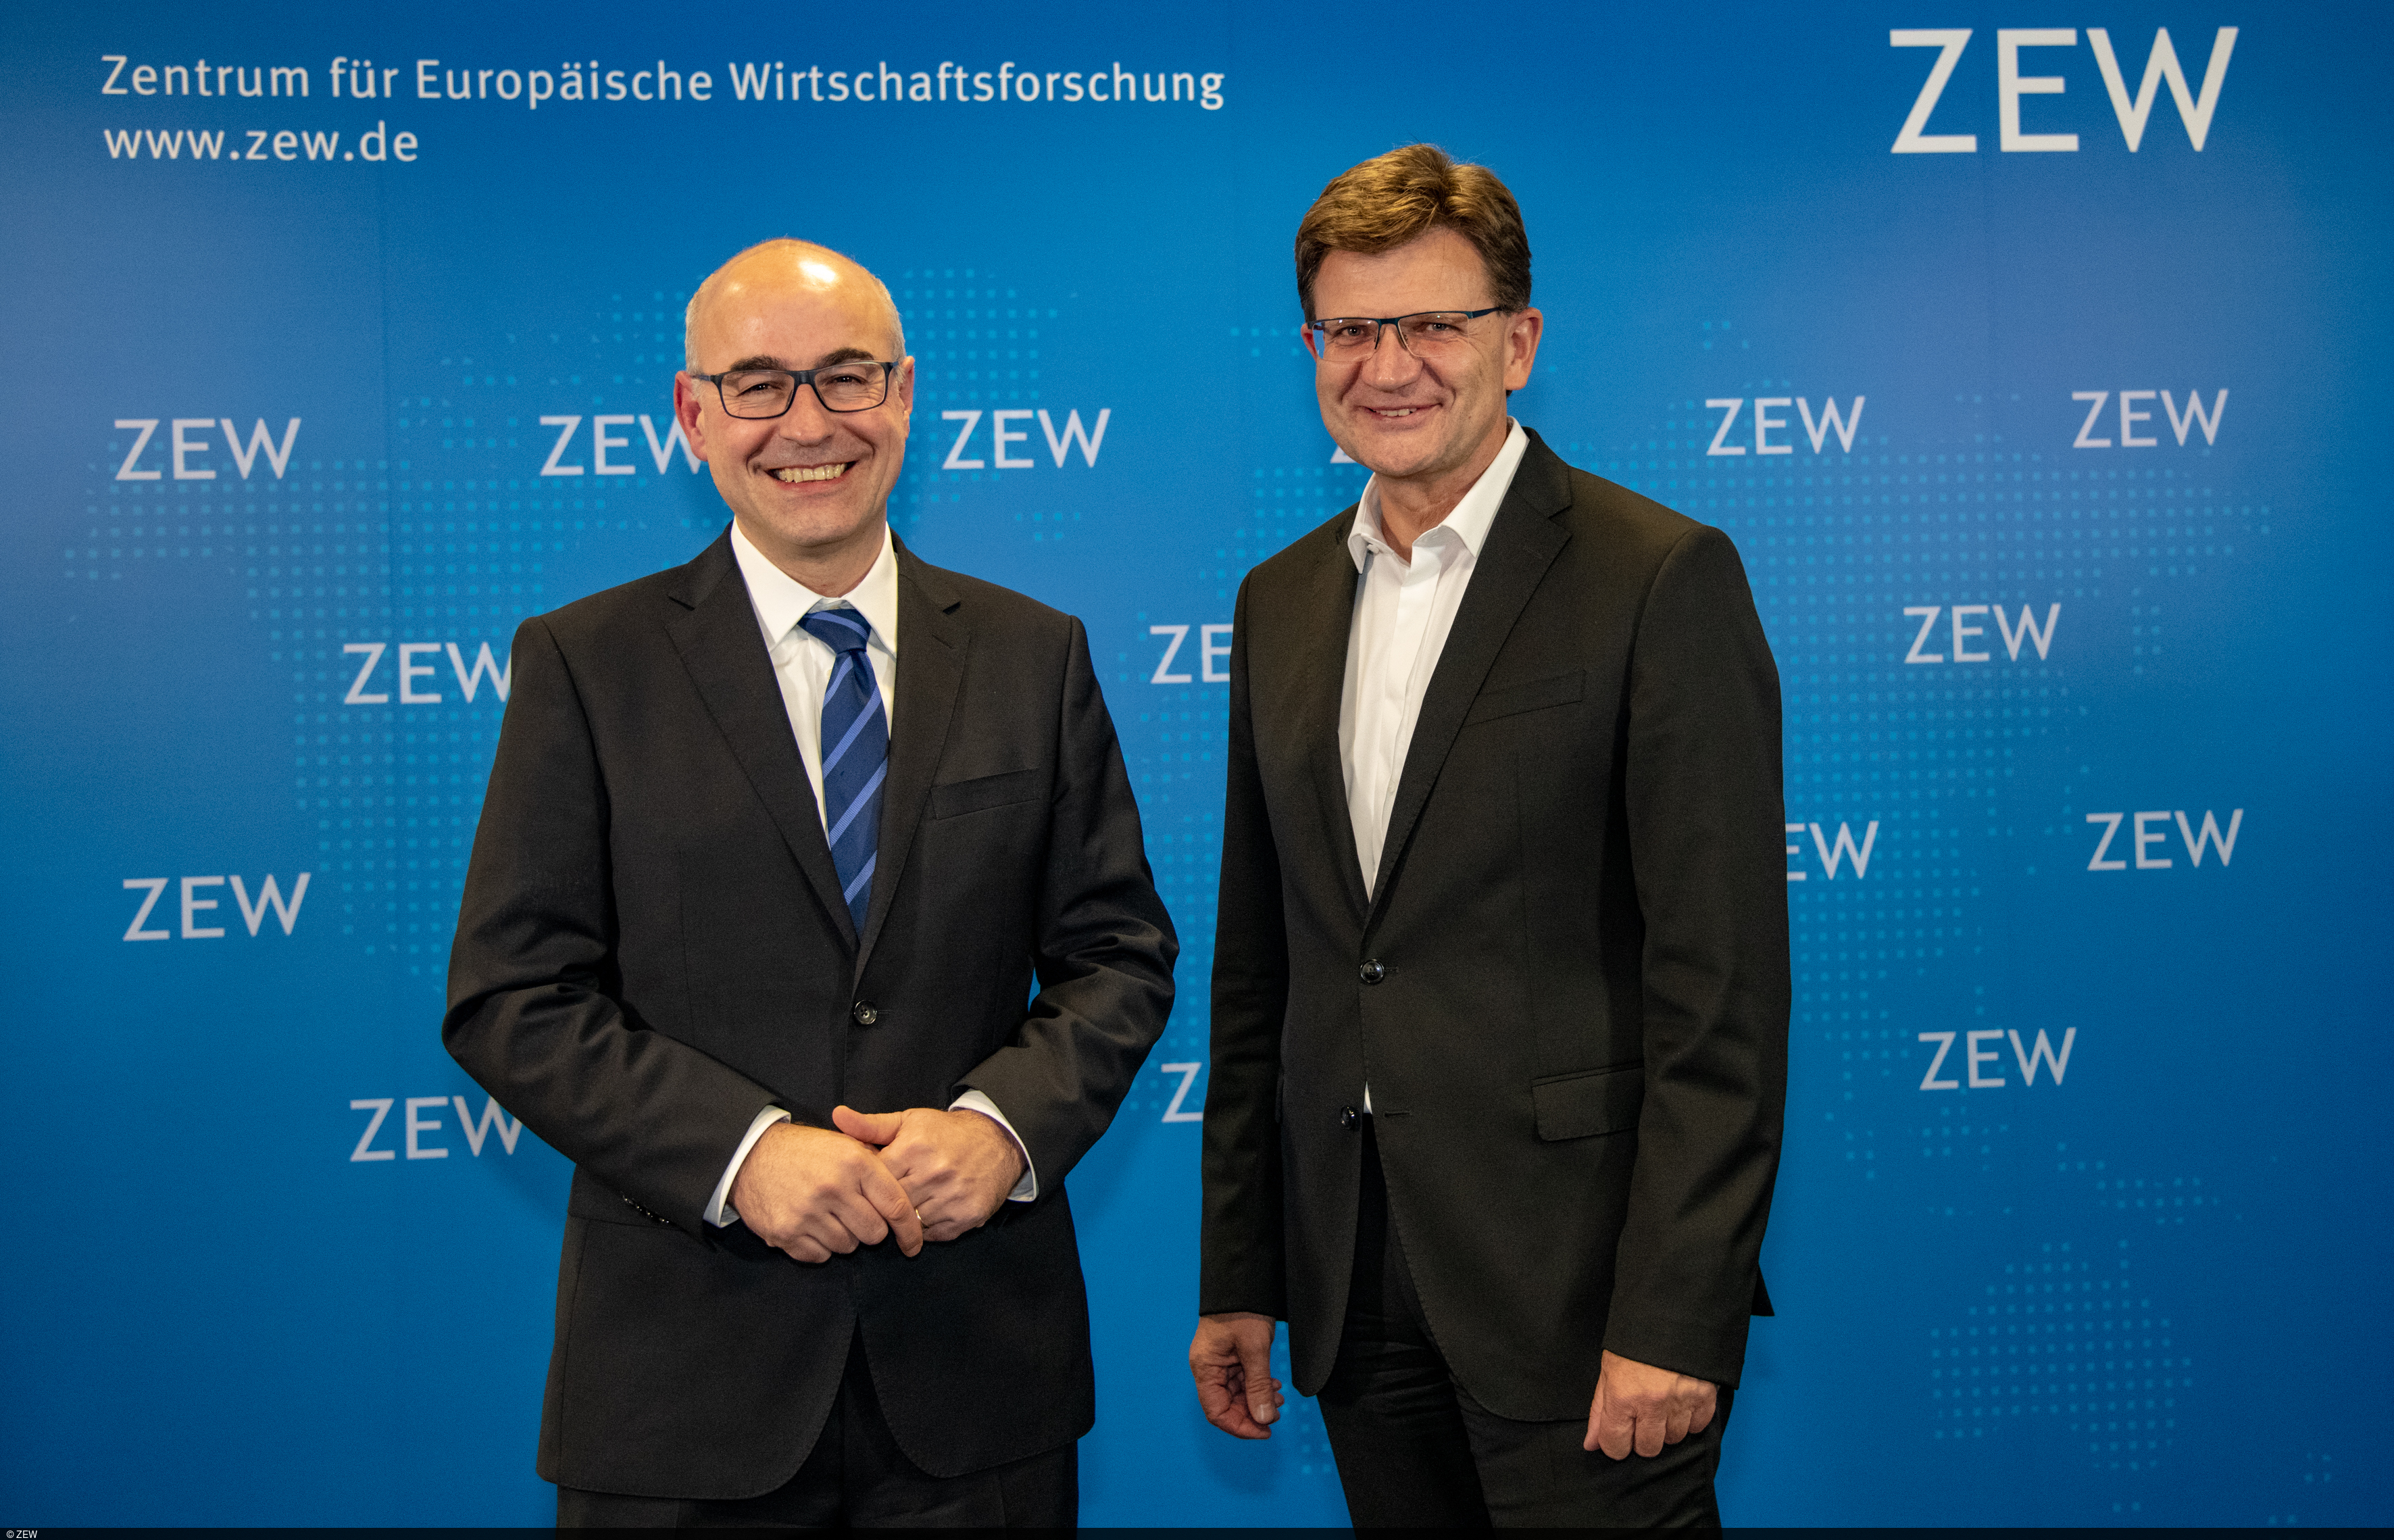 ZEW president Achim Wambach welcomes Klaus Fröhlich for his lecture on the future of the automotive industry.